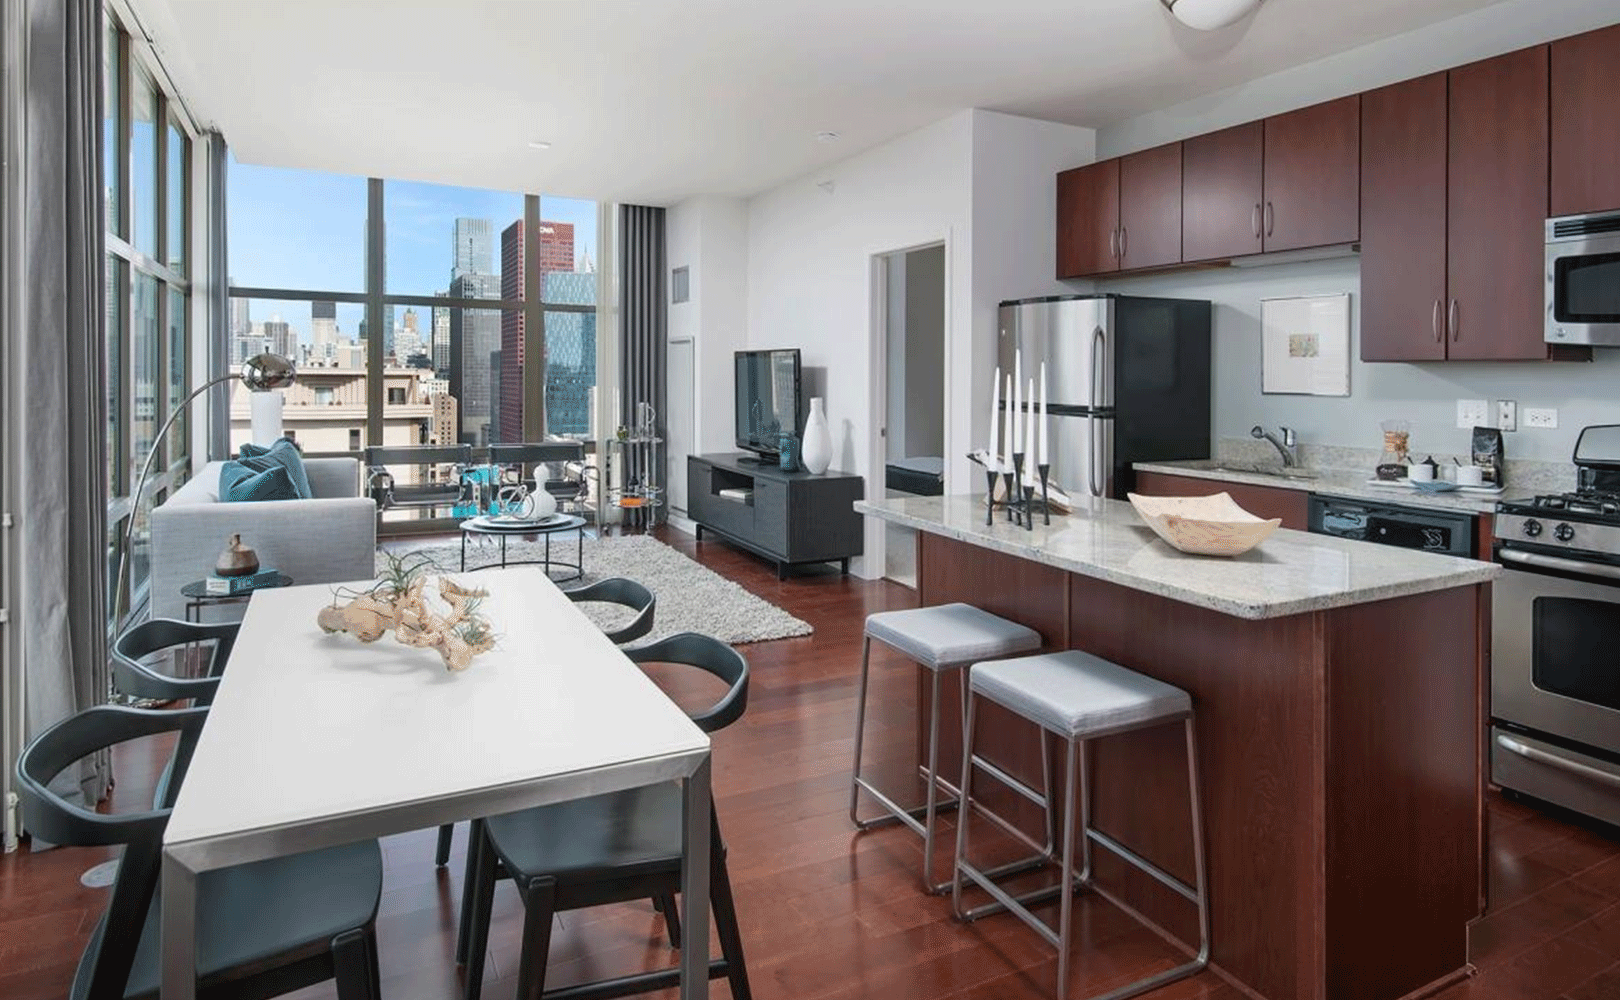 luxury south loop apartment, with modern kitchen, wood floors and sweeping views of Chicago